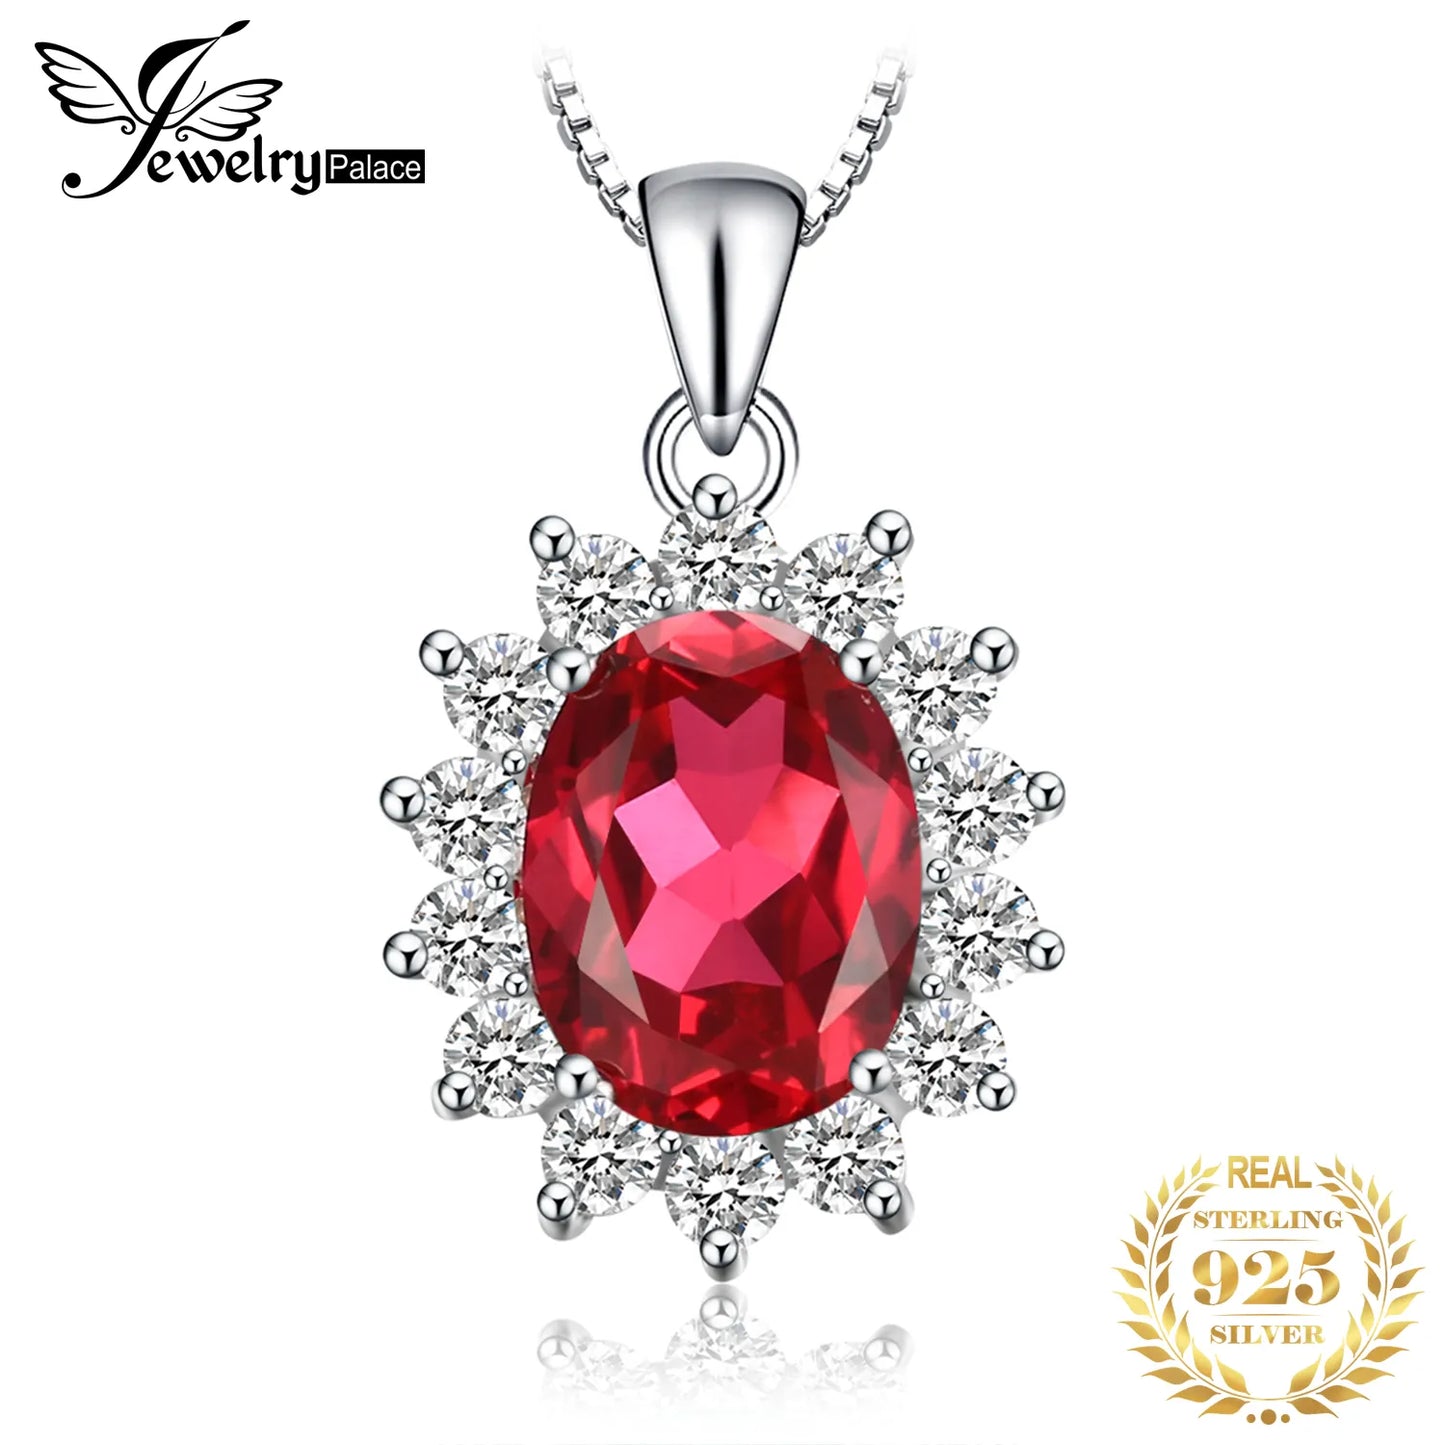 JewelryPalace 2.6ct Created Red Ruby 925 Sterling Silver Pendant Necklace for Woman Fashion Trendy Gemstone Jewelry No Chain Default Title